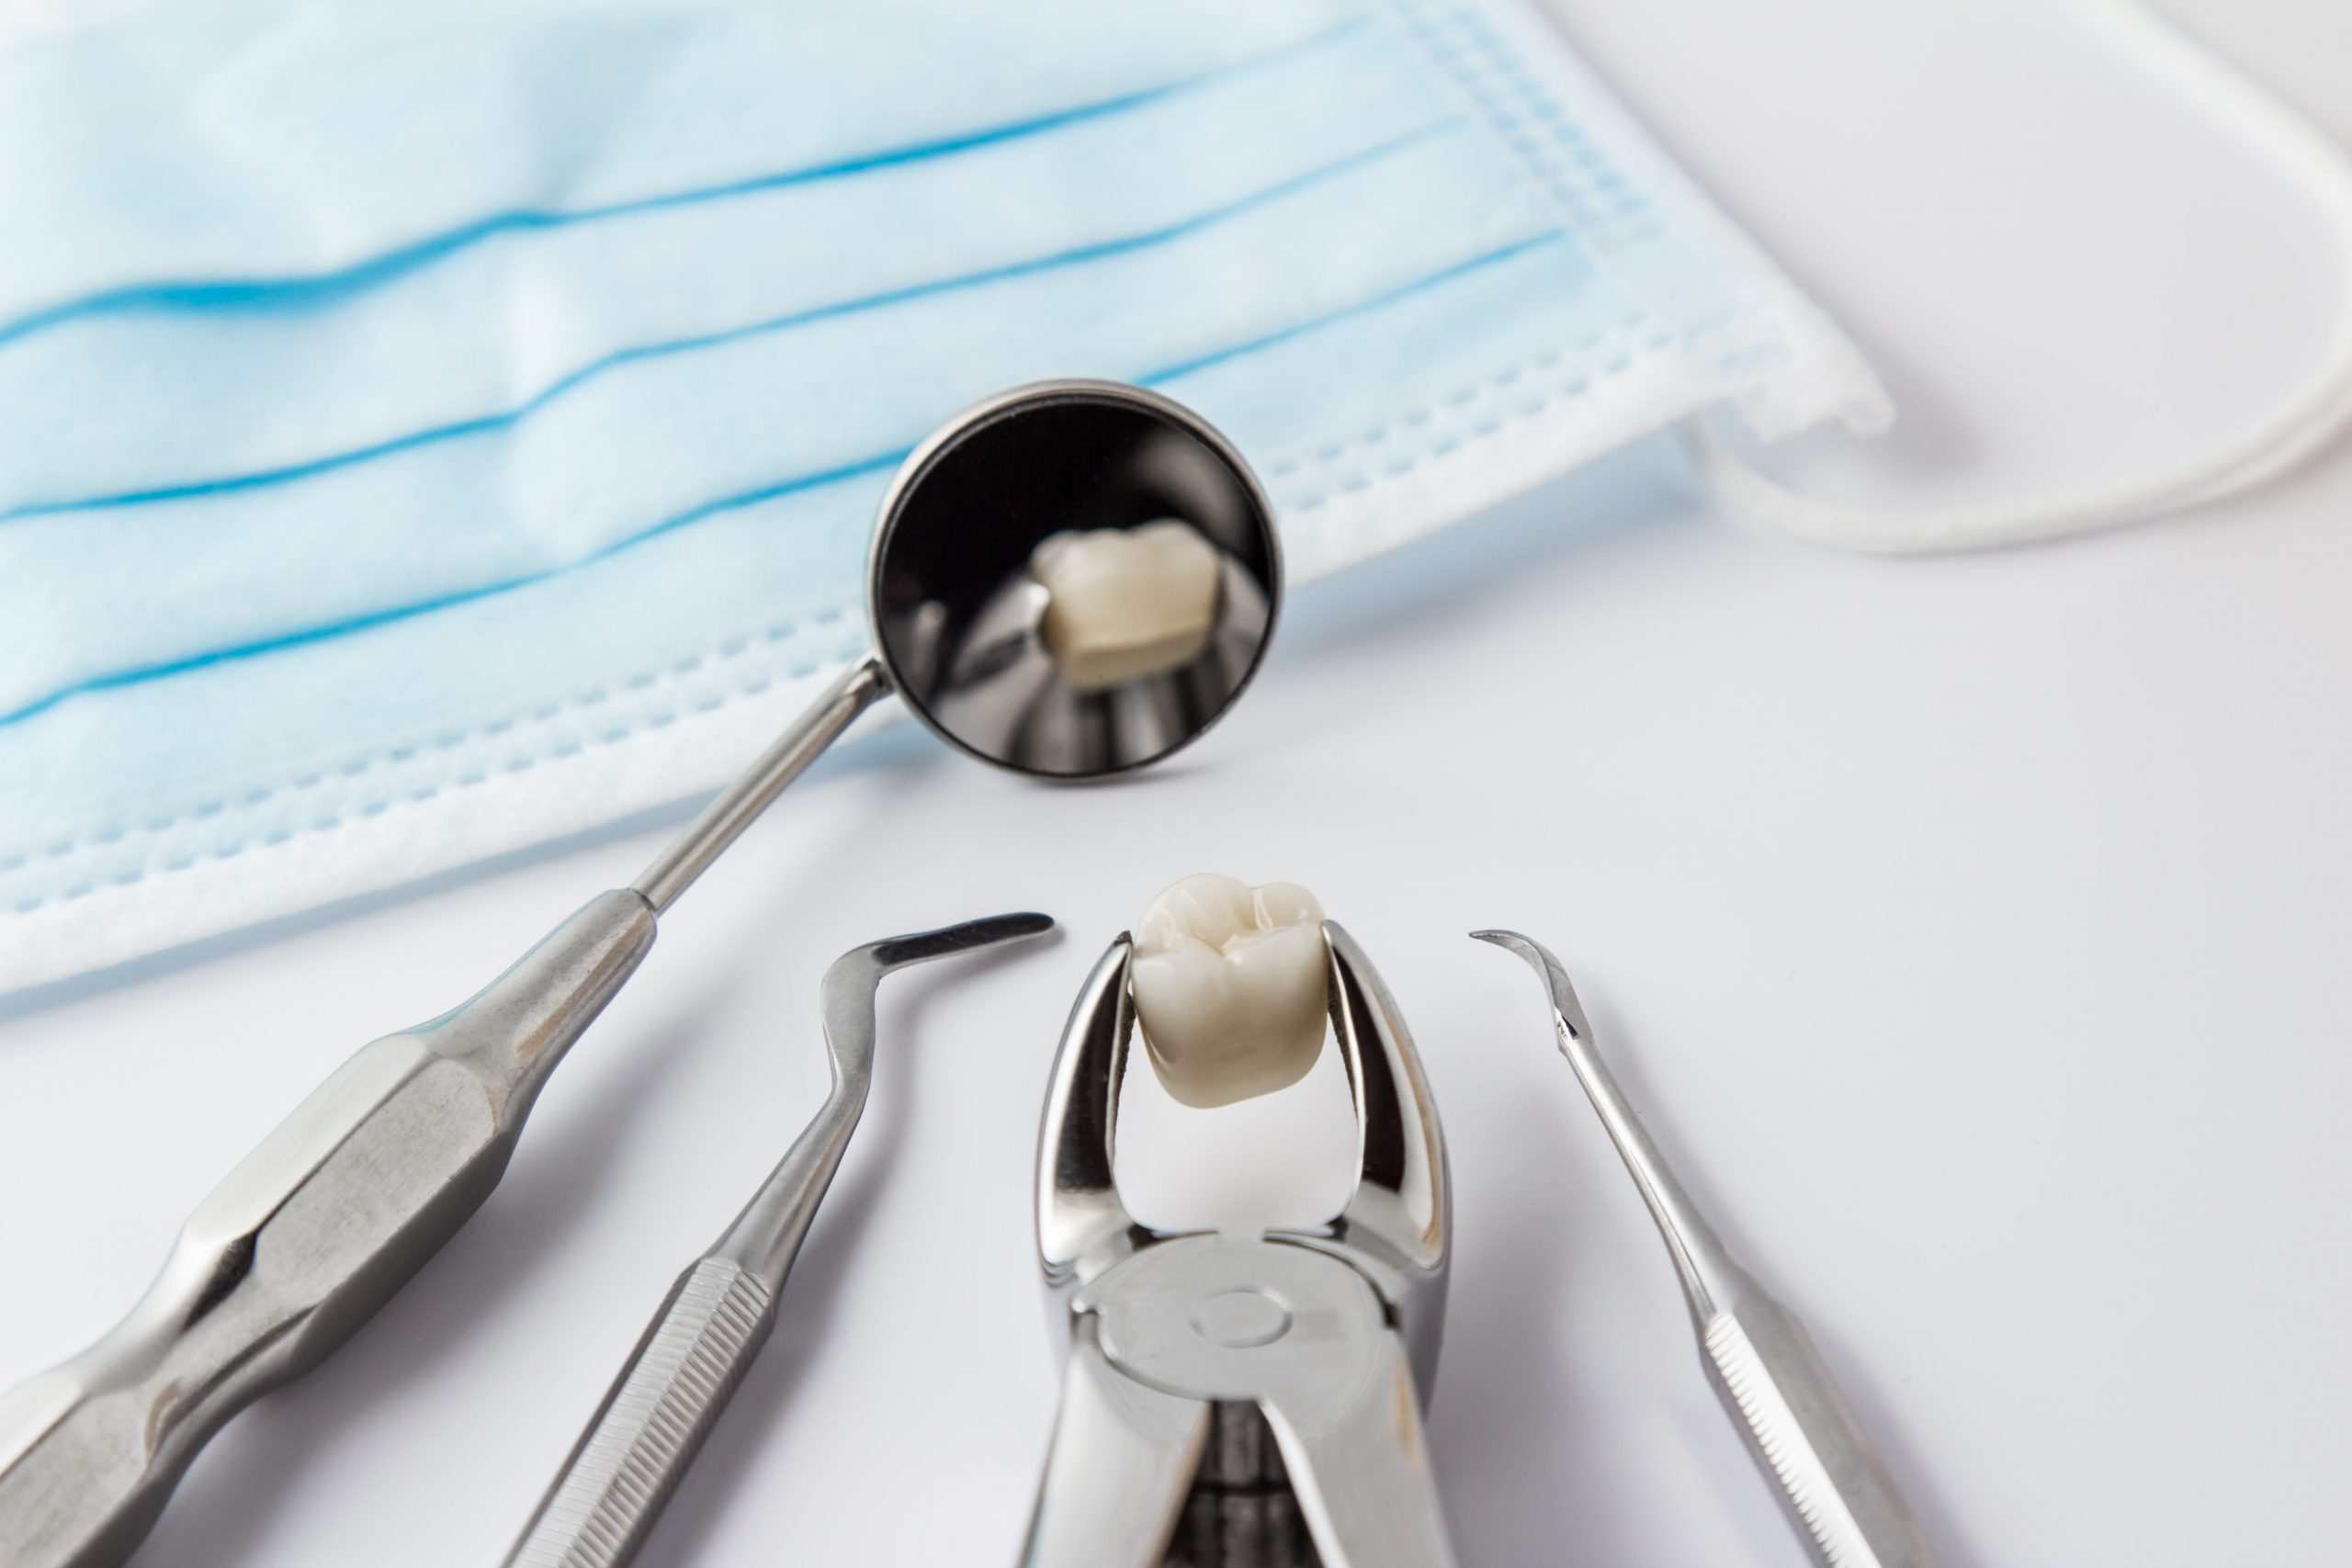 Dentistry tools and surgical mask